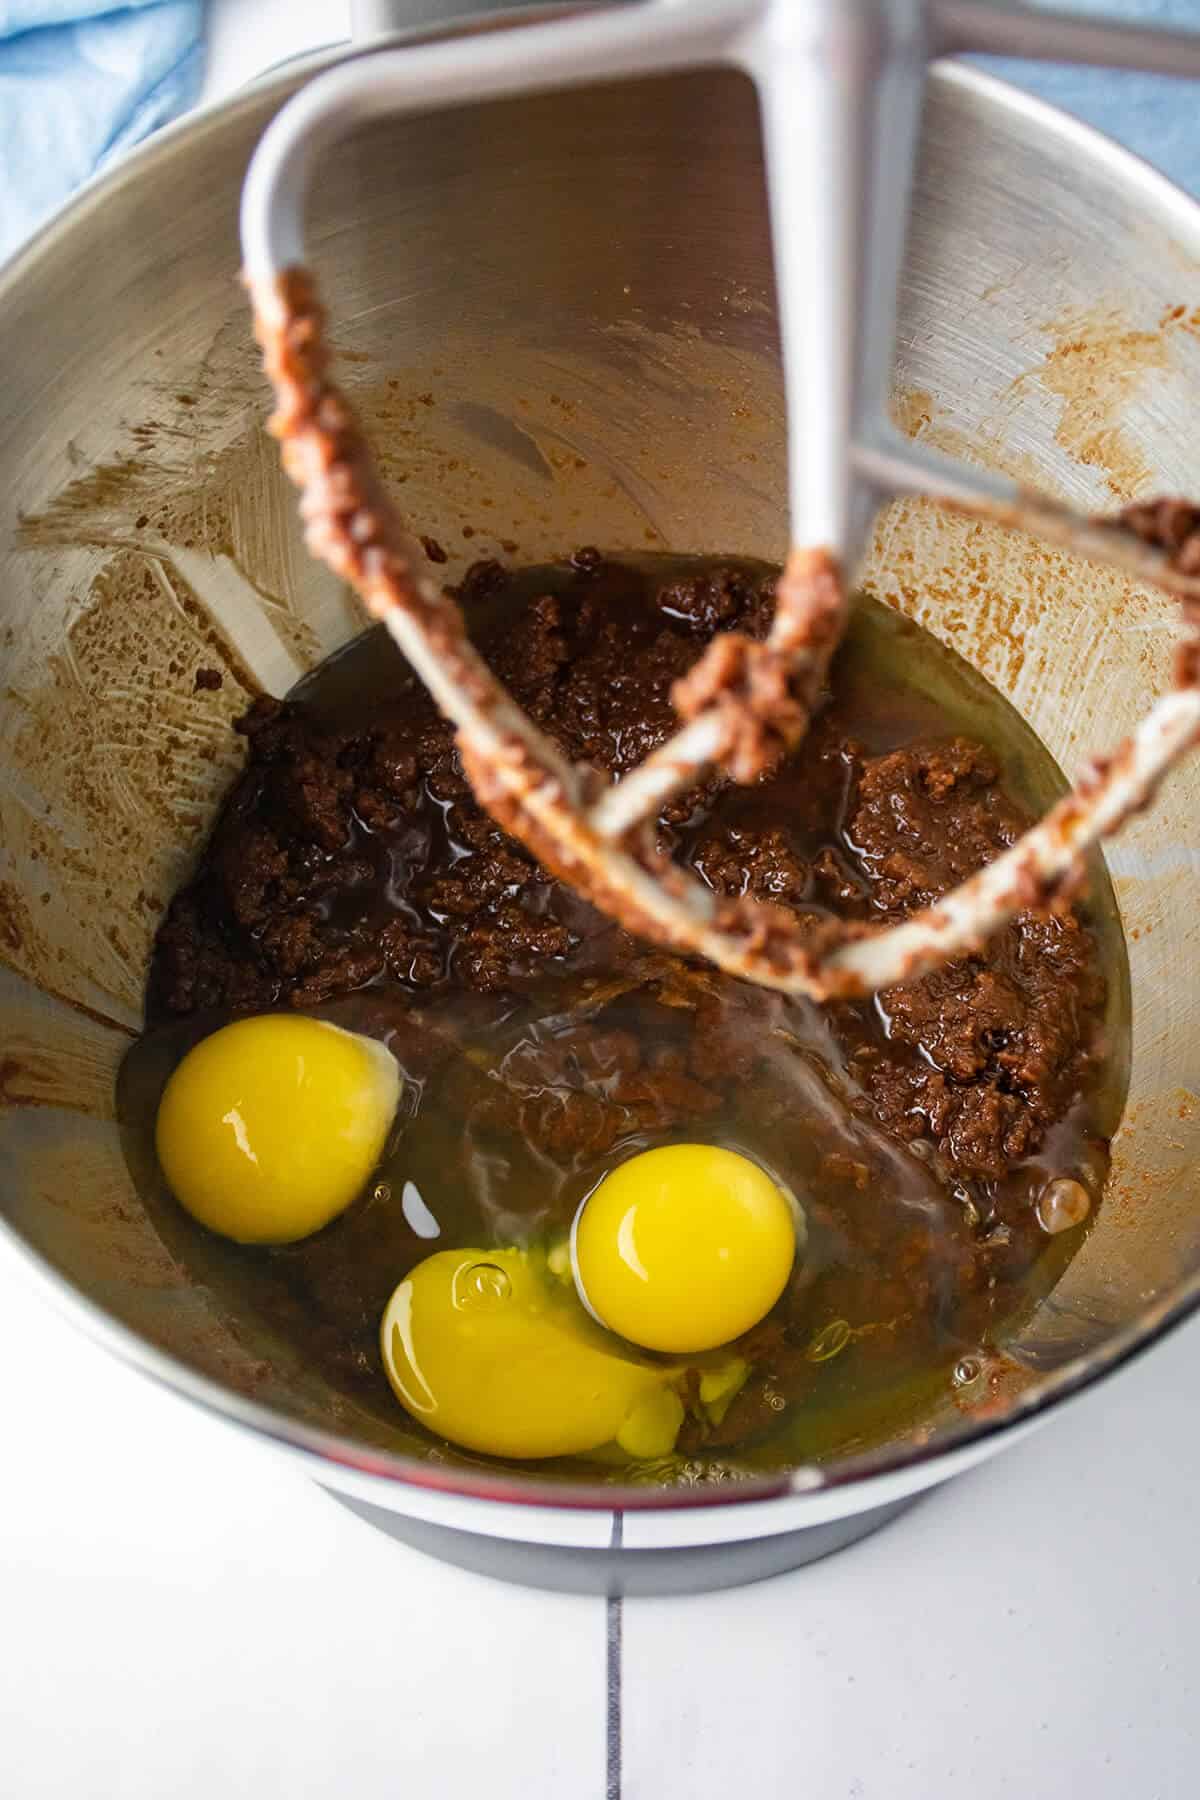 Eggs added to chocolate-sugar mixture in bowl.